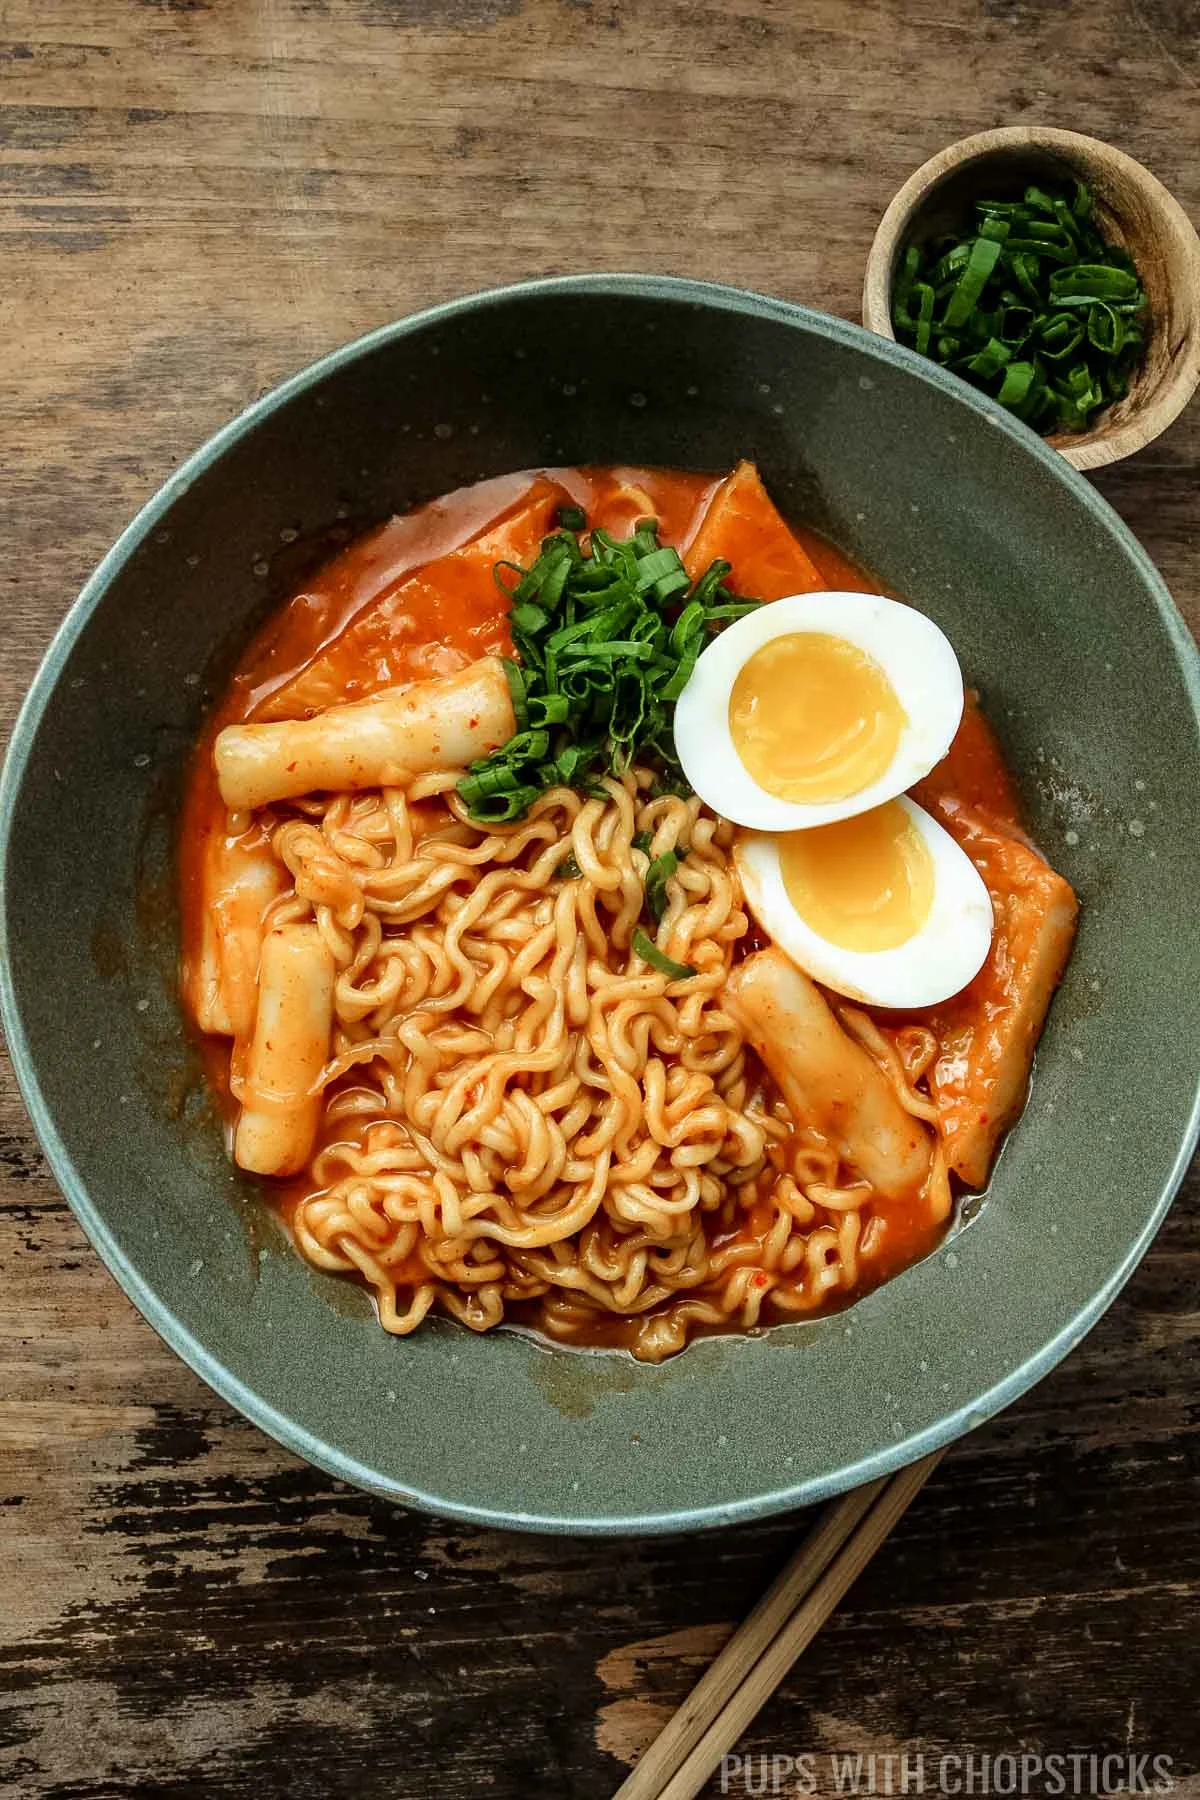 Rabokki served with a soft boiled egg in a green bowl with wooden chopsticks